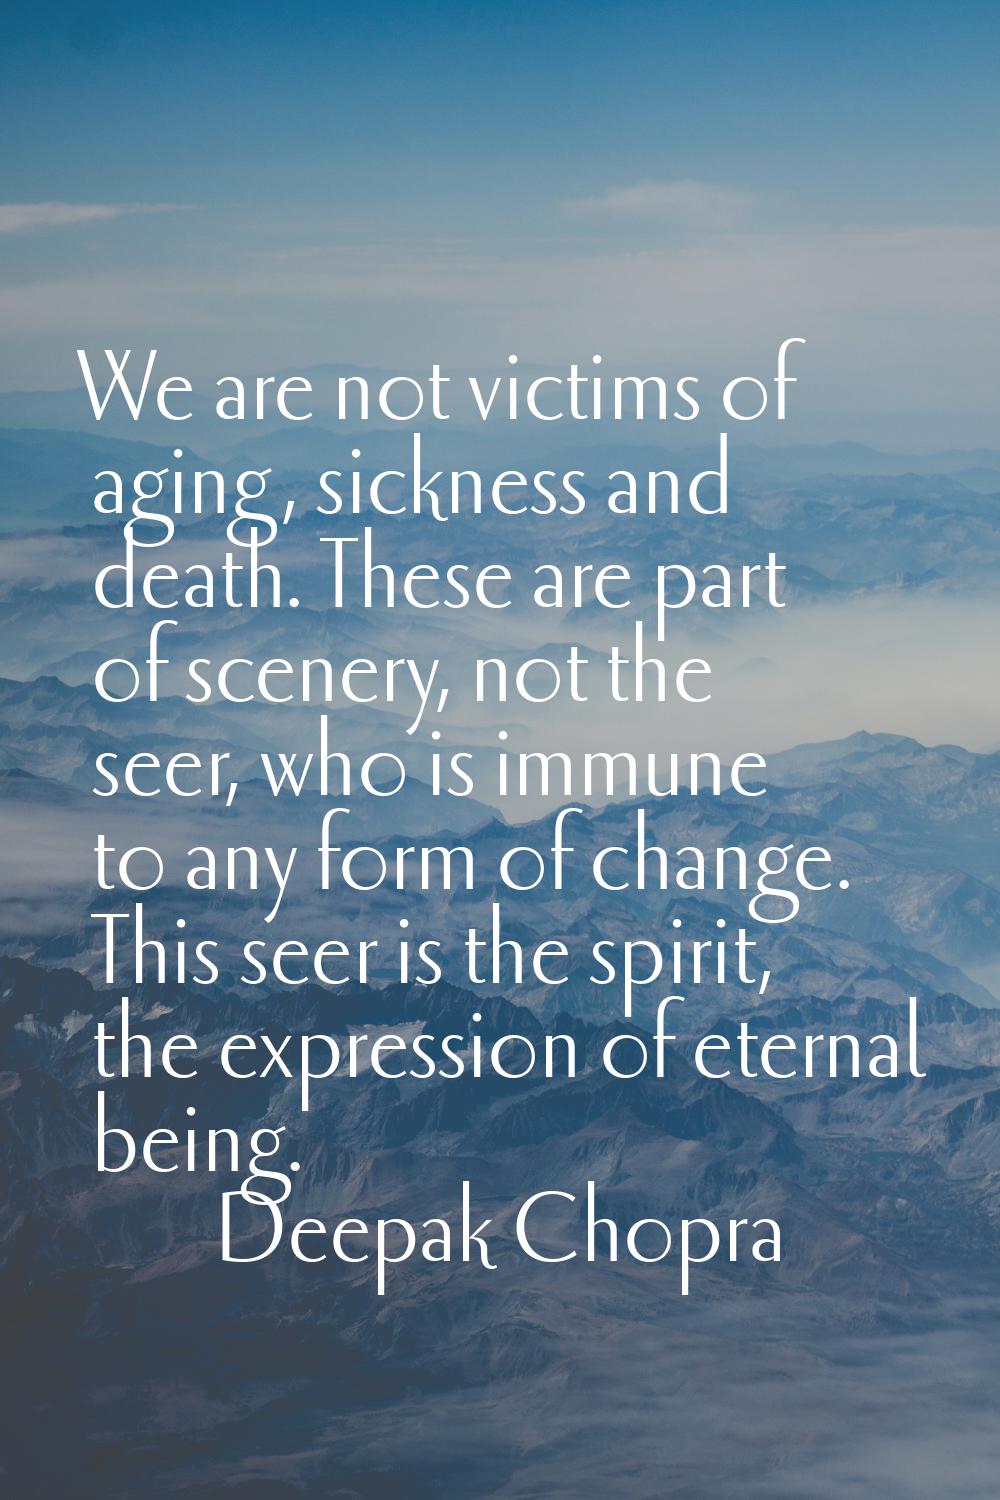 We are not victims of aging, sickness and death. These are part of scenery, not the seer, who is im